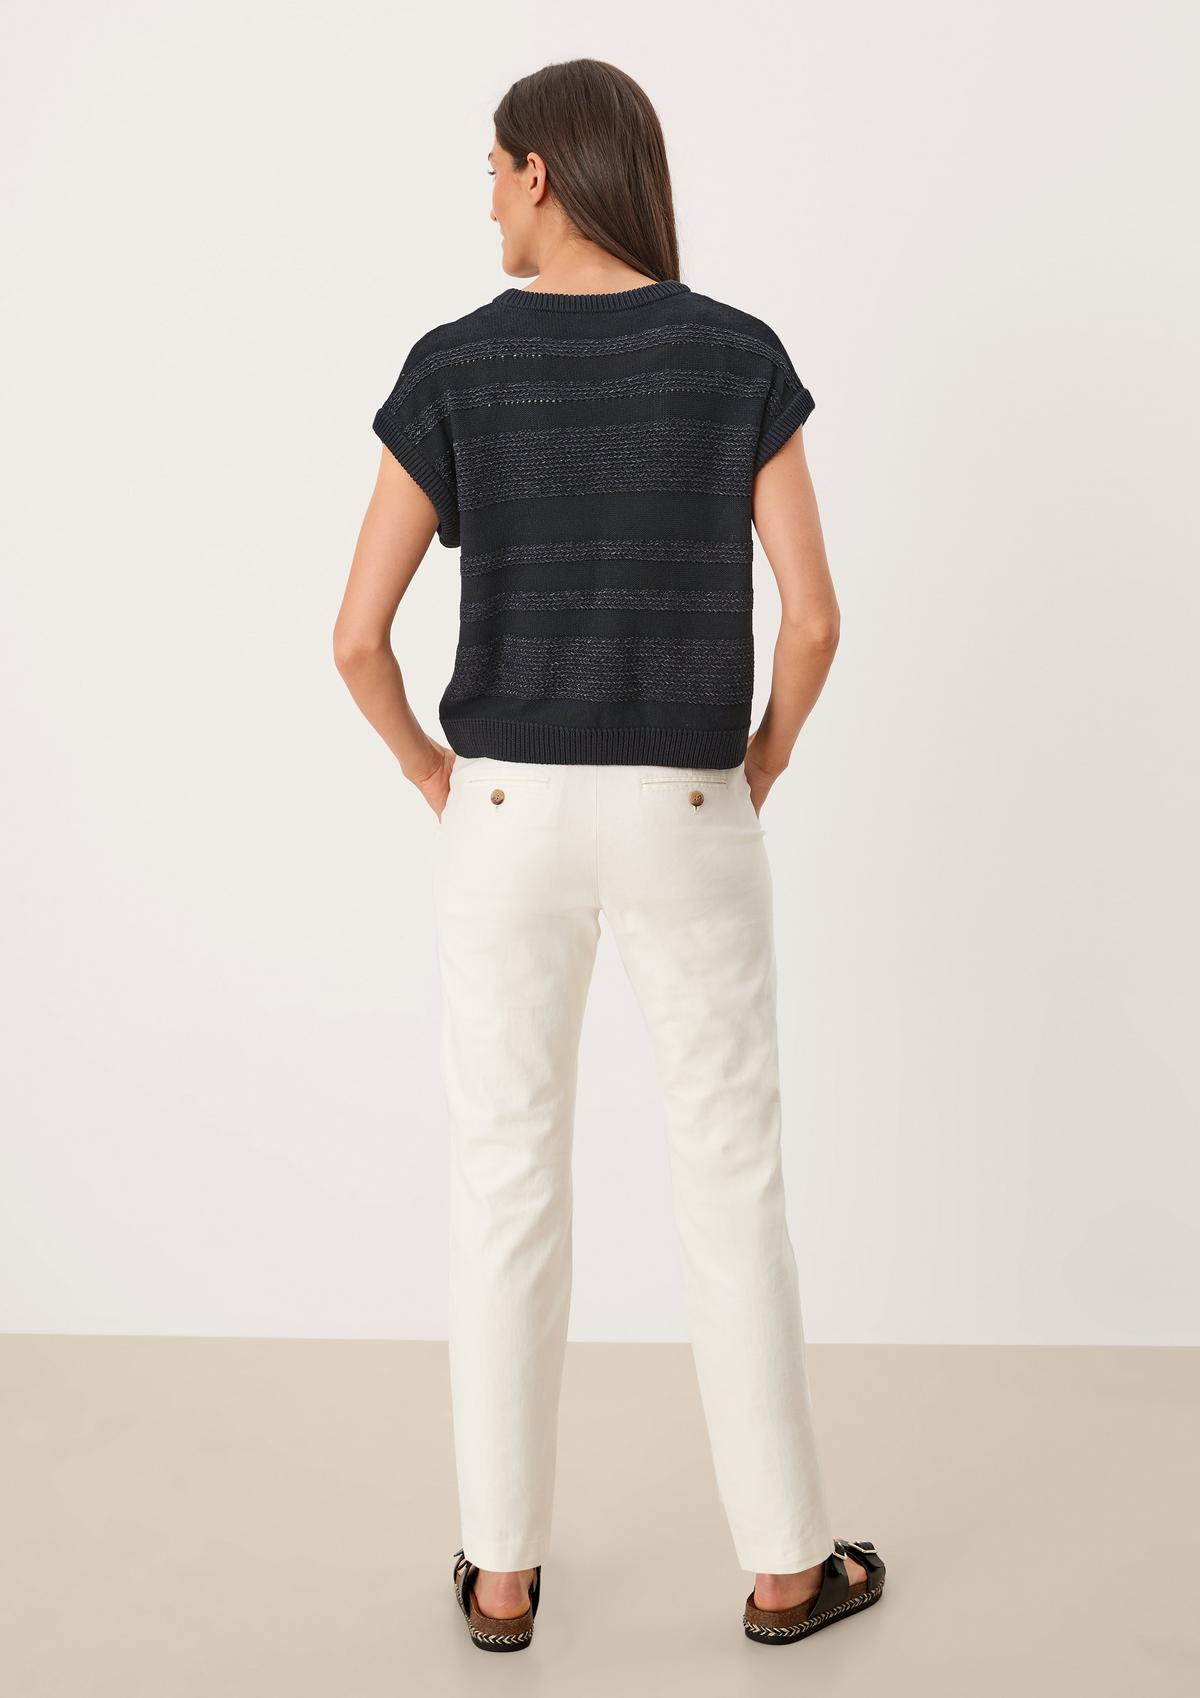 s.Oliver Sleeveless top with a knit pattern